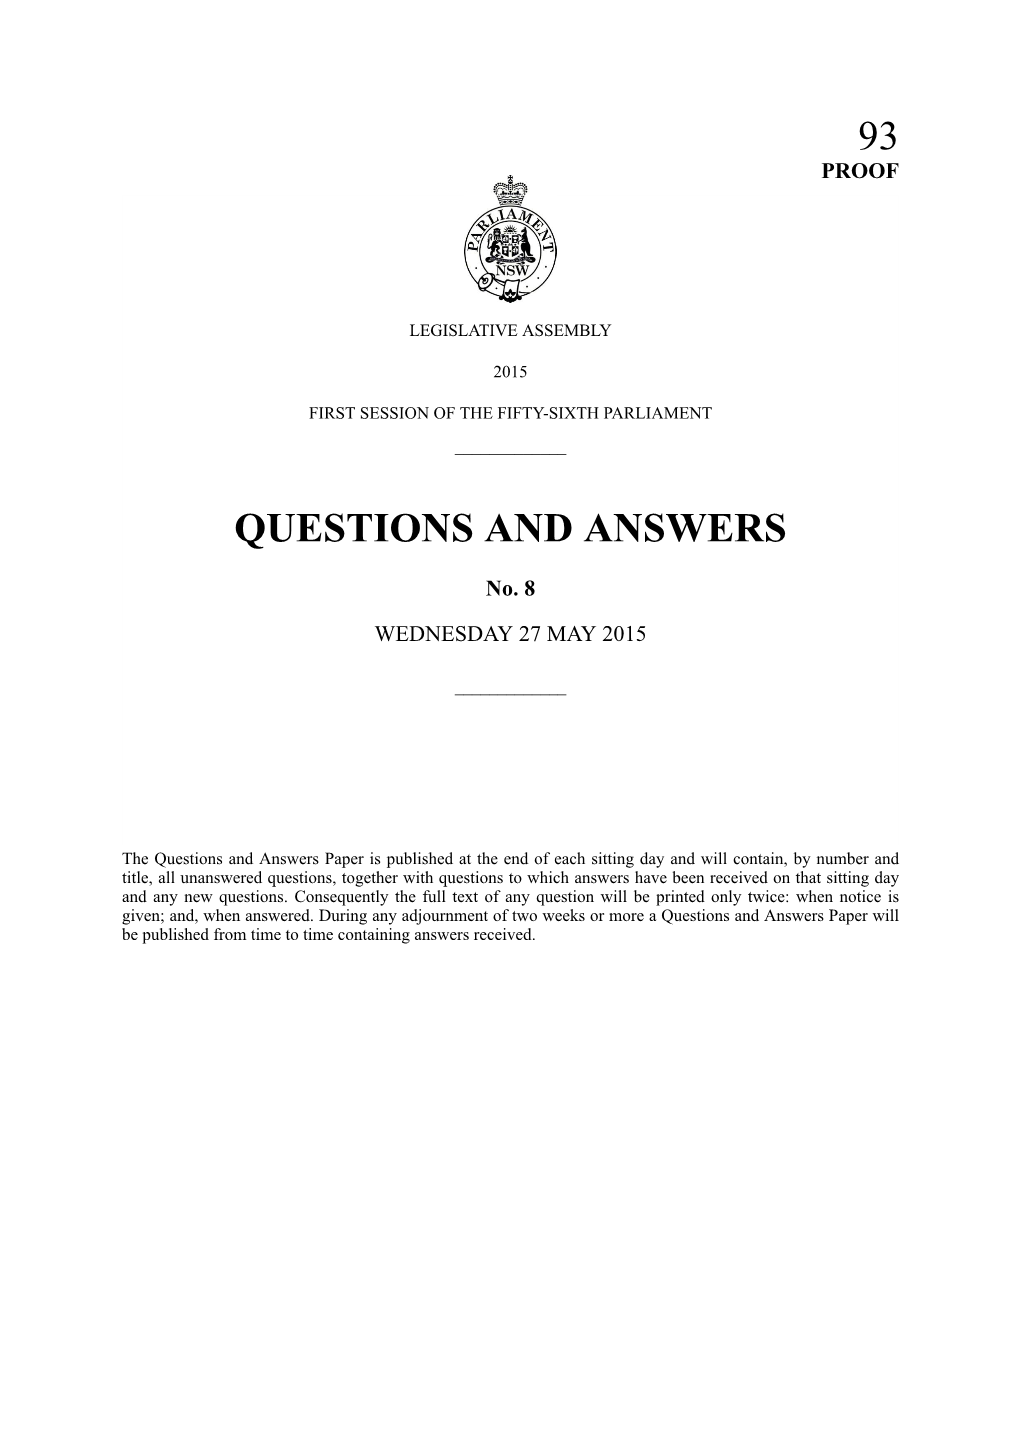 Questions & Answers Paper No. 8